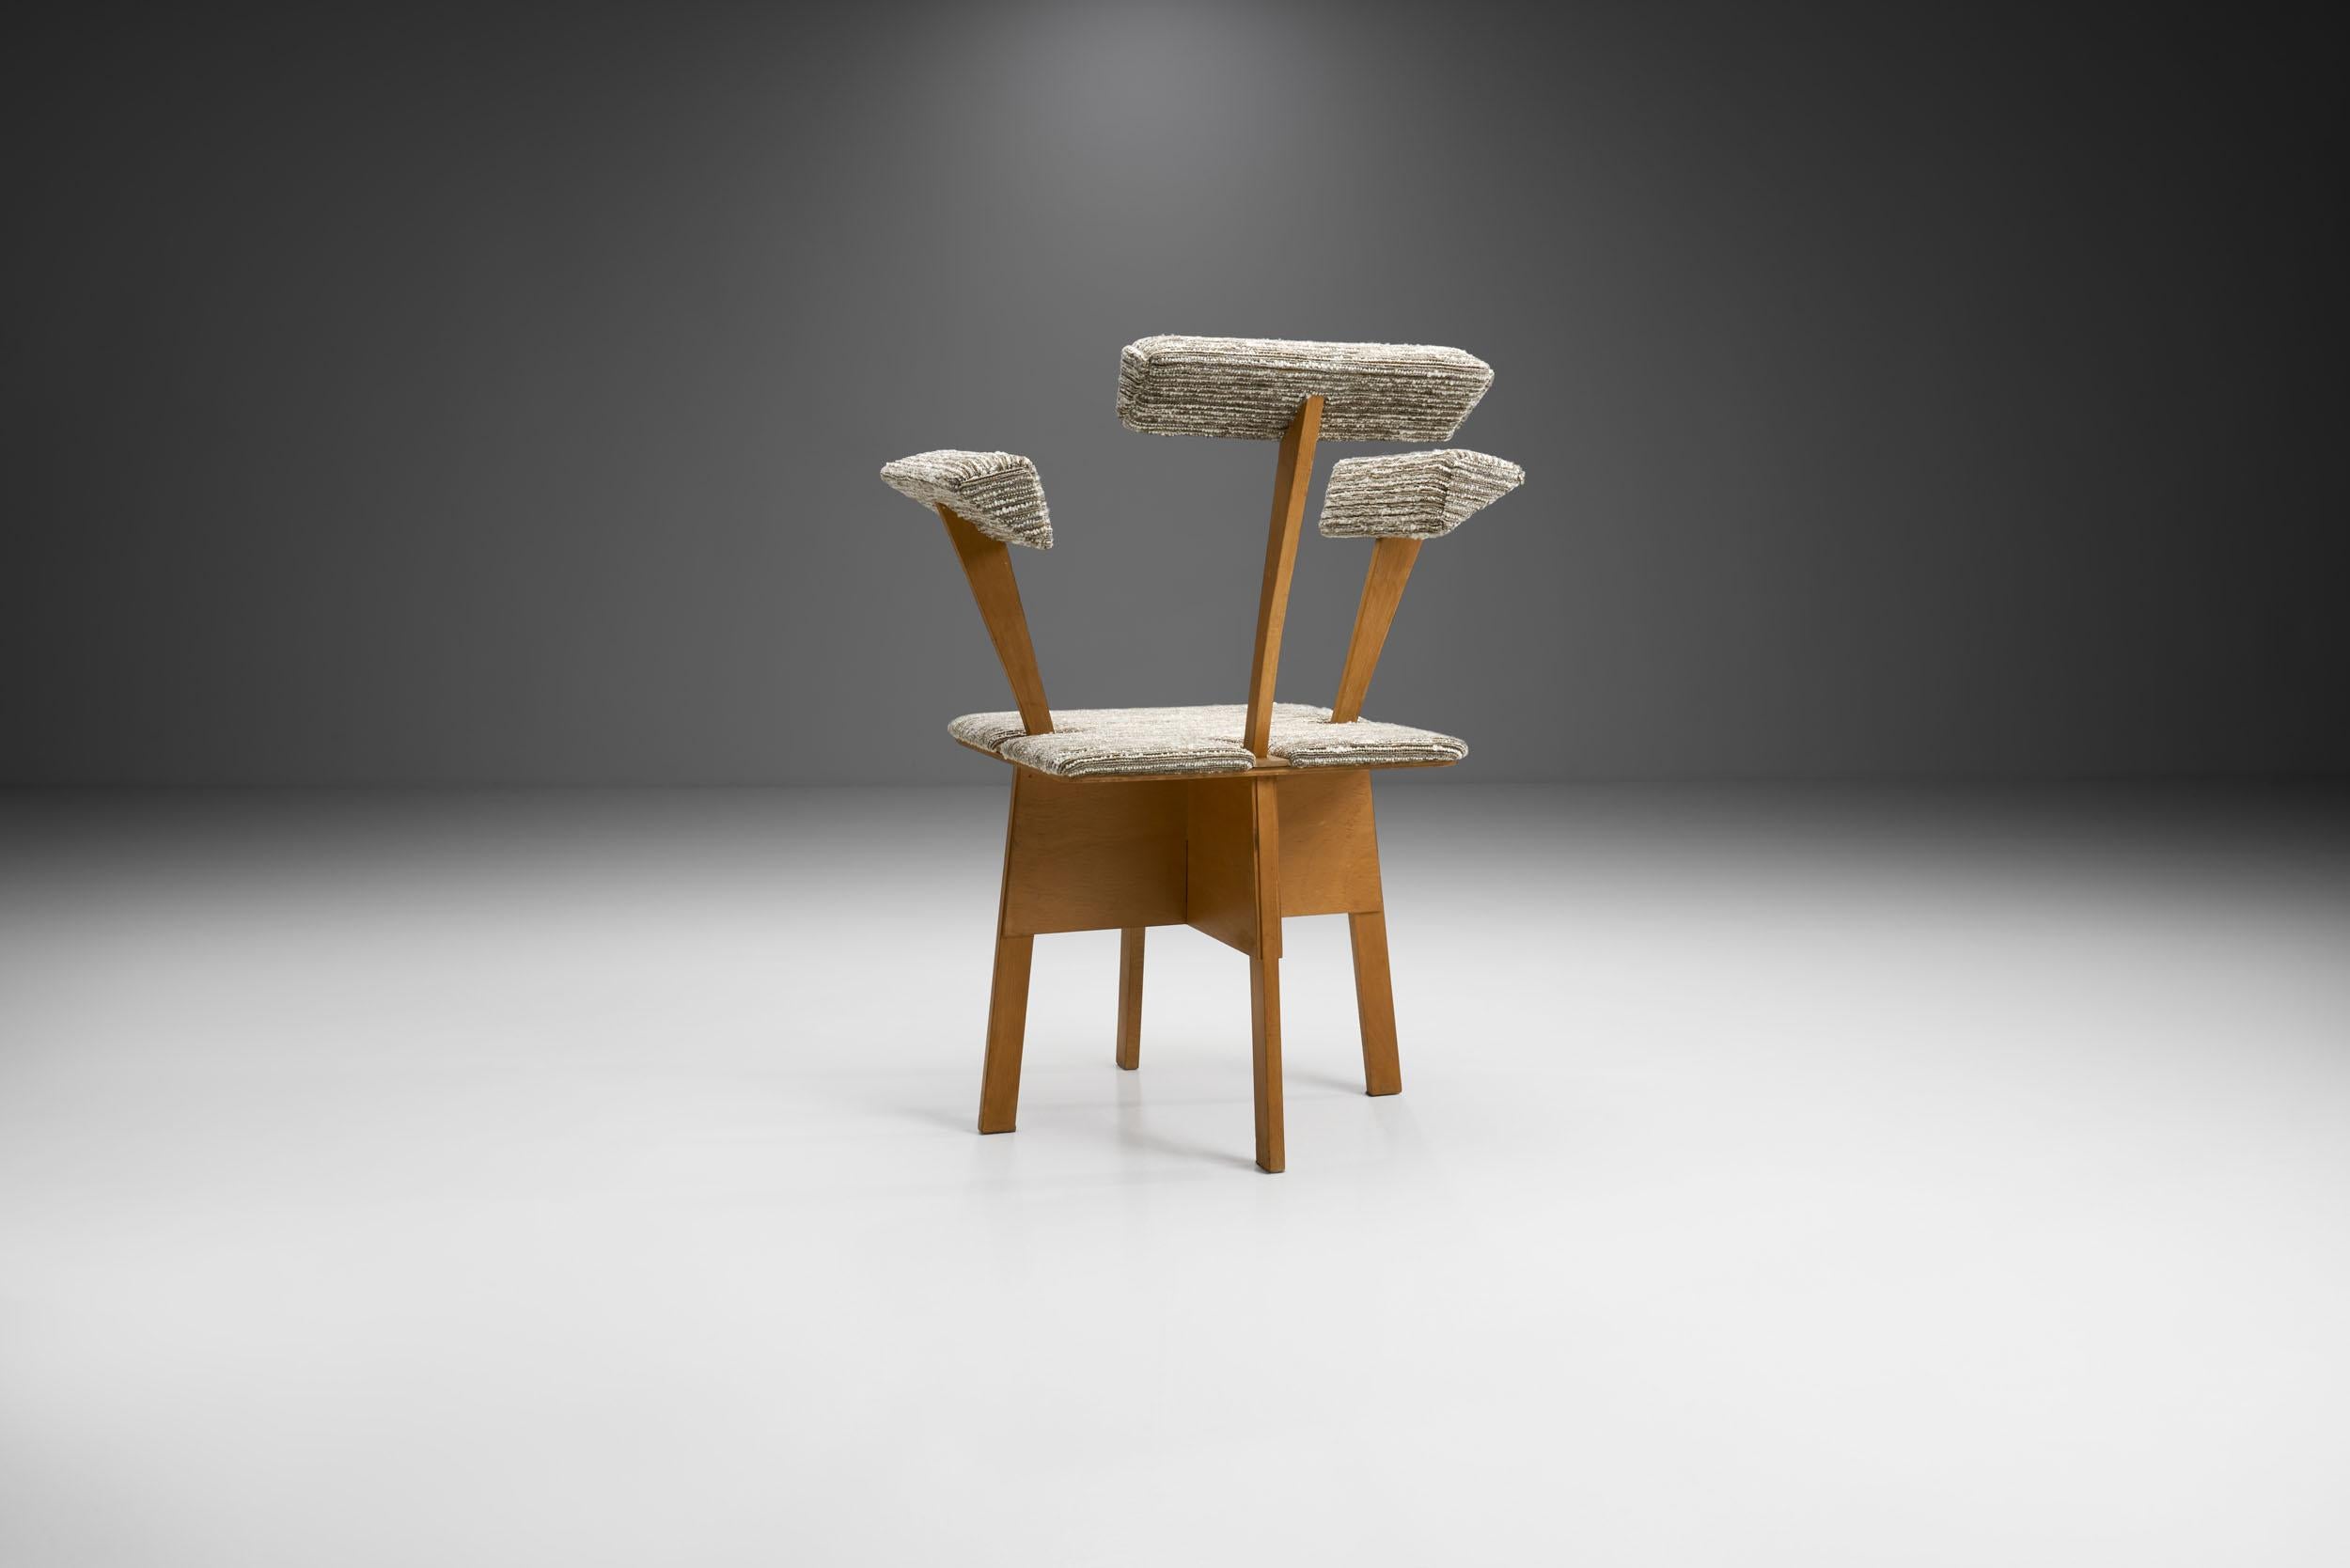 Bouclé Midcentury Dutch Plywood Chair, the Netherlands, 1940s For Sale